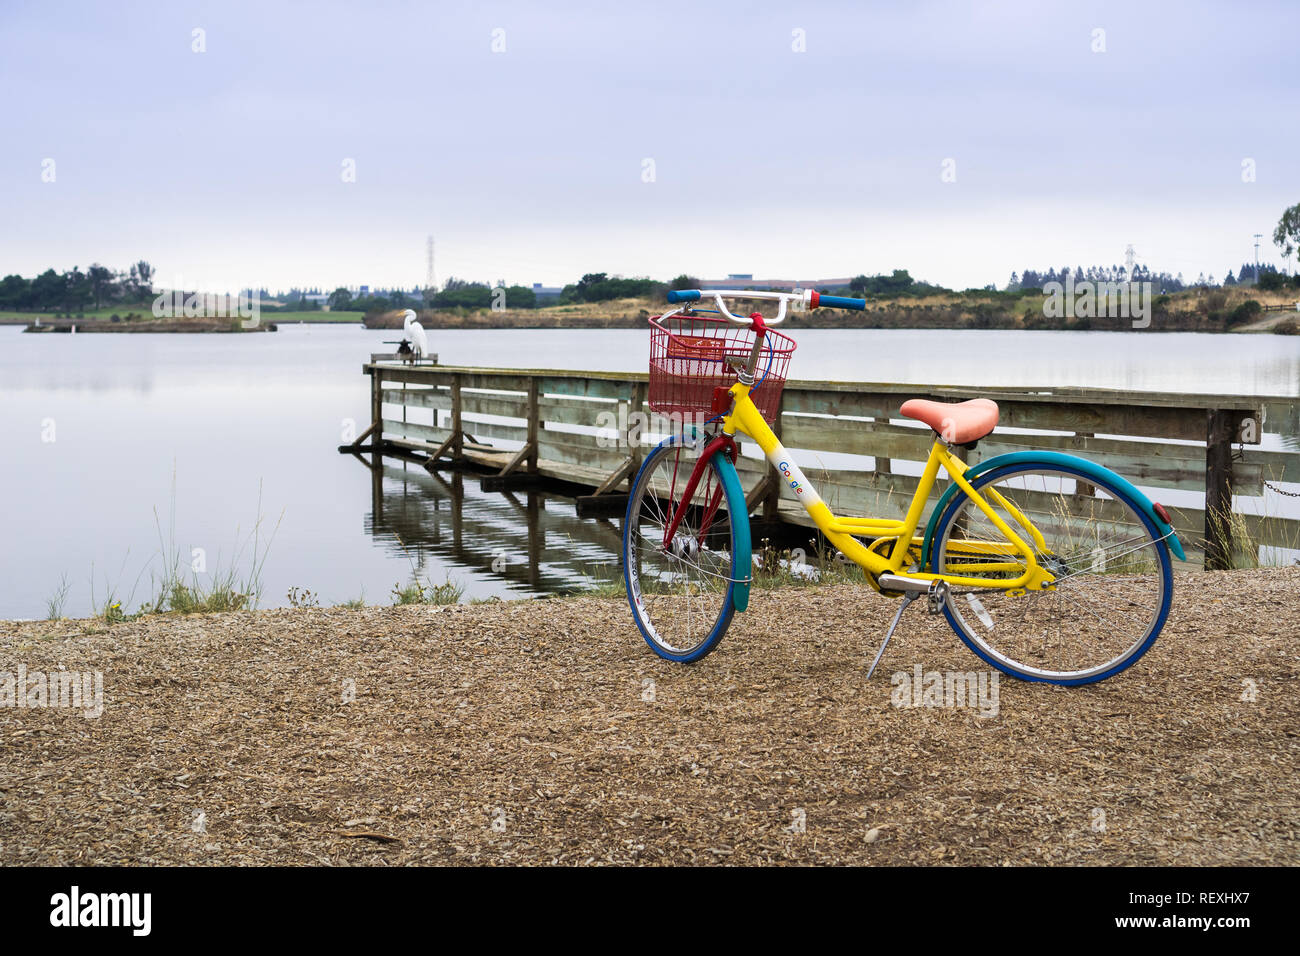 August 29, 2017 Mountain View/CA/USA - Google Bicycle left in Shoreline Park, near the bay trail Stock Photo